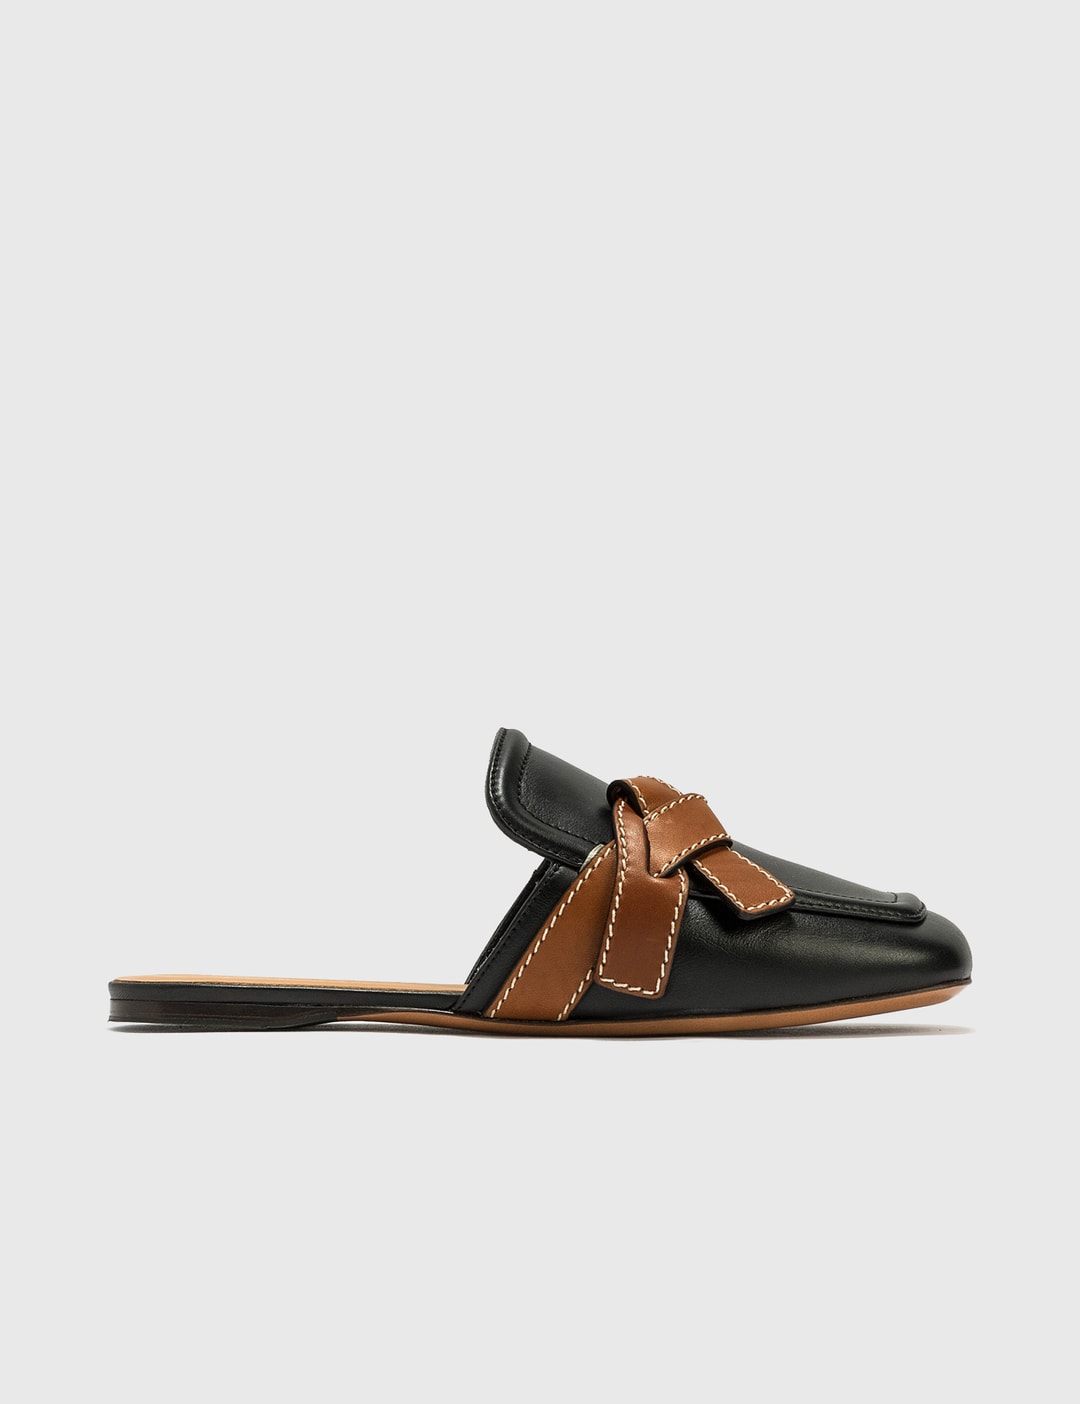 Loewe - Gate Flat Mule | HBX - Globally Curated Fashion and Lifestyle ...